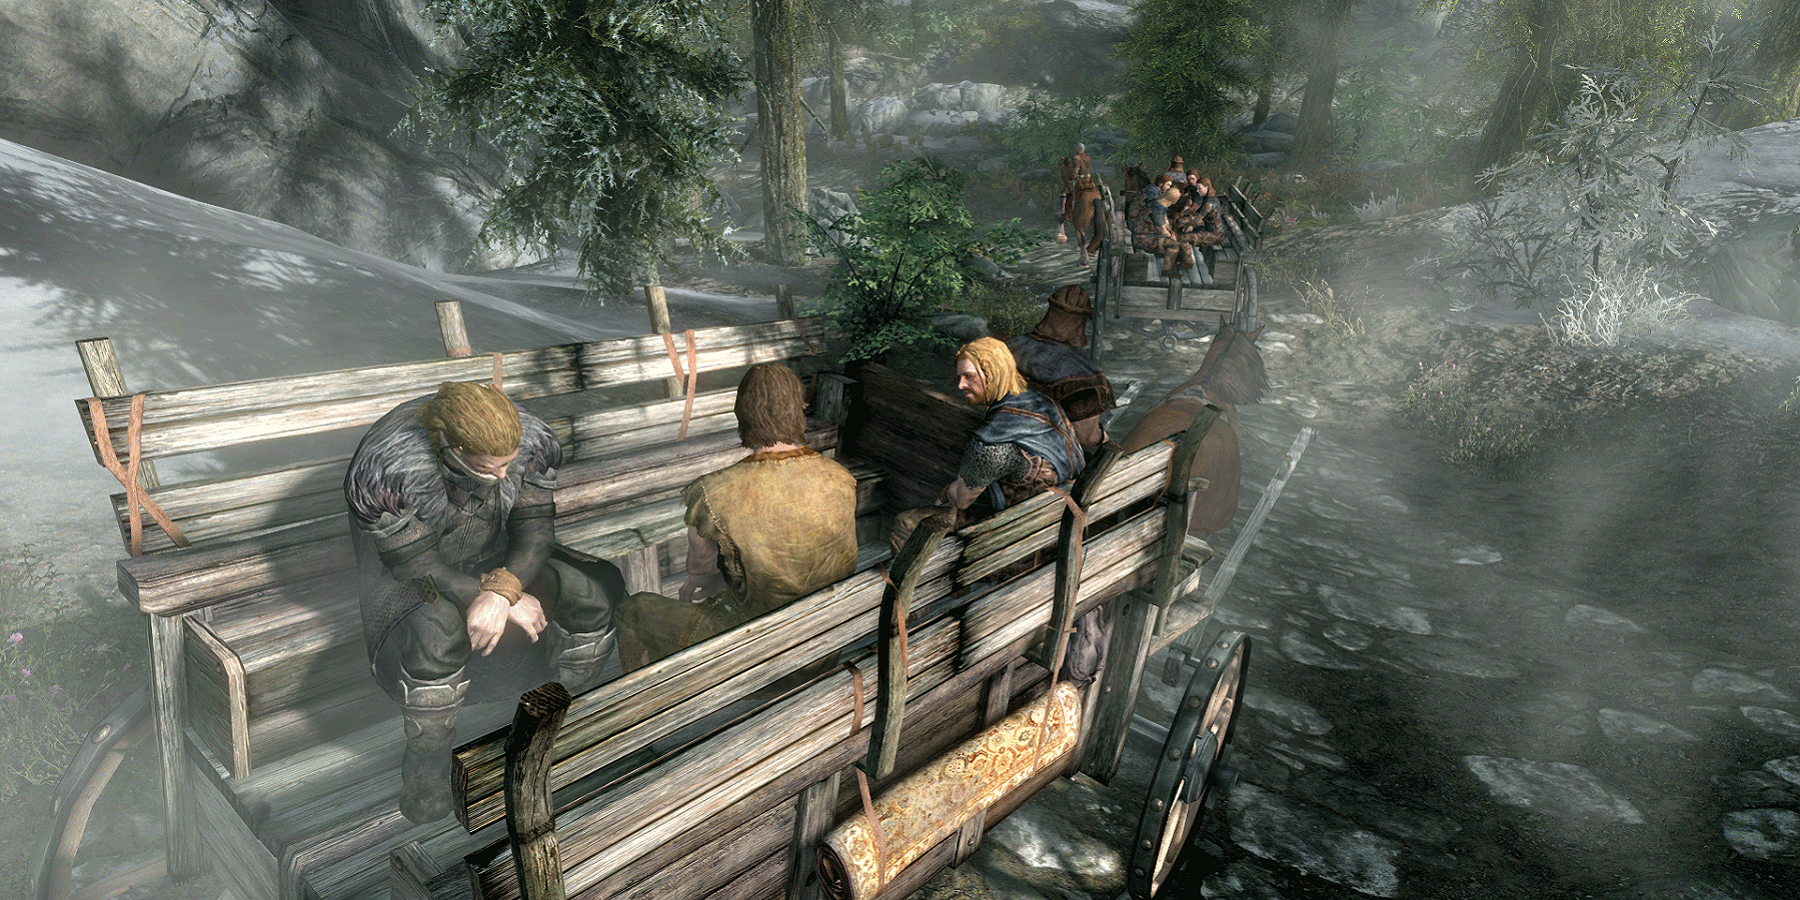 Screenshot from The Elder Scrolls 5: Skyrim showing the opening cart ride cutscene from a different angle.